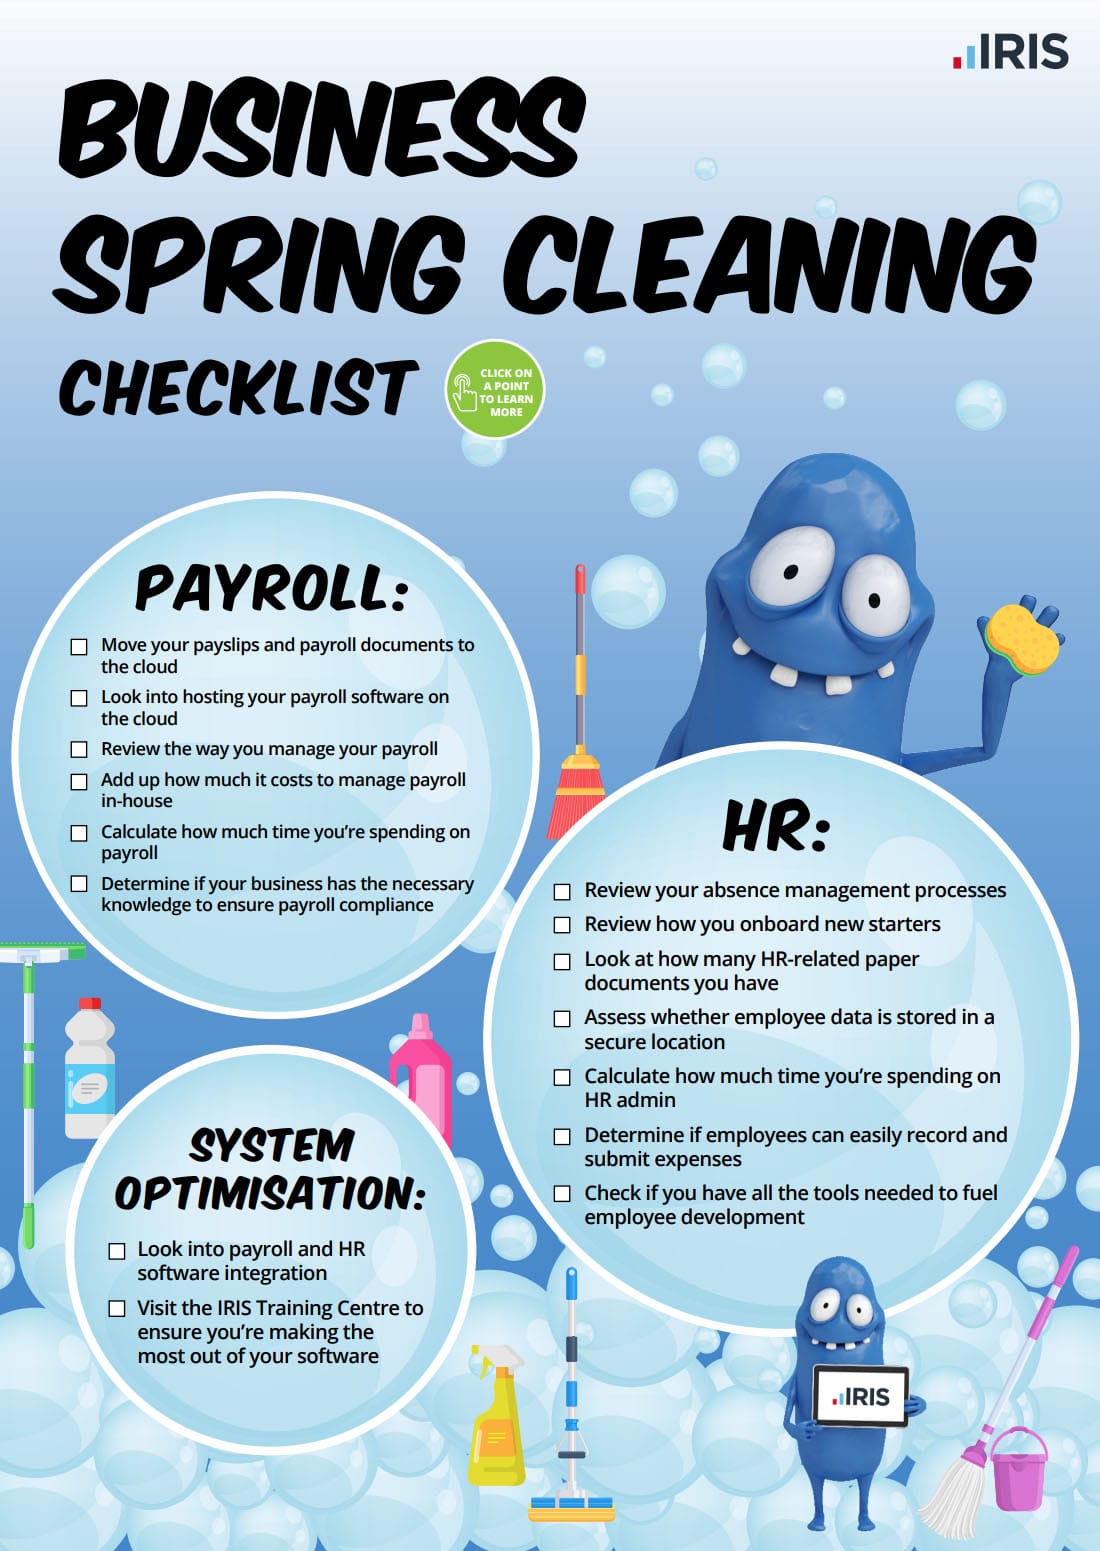 spring cleaning day 2016 in mount prospect il